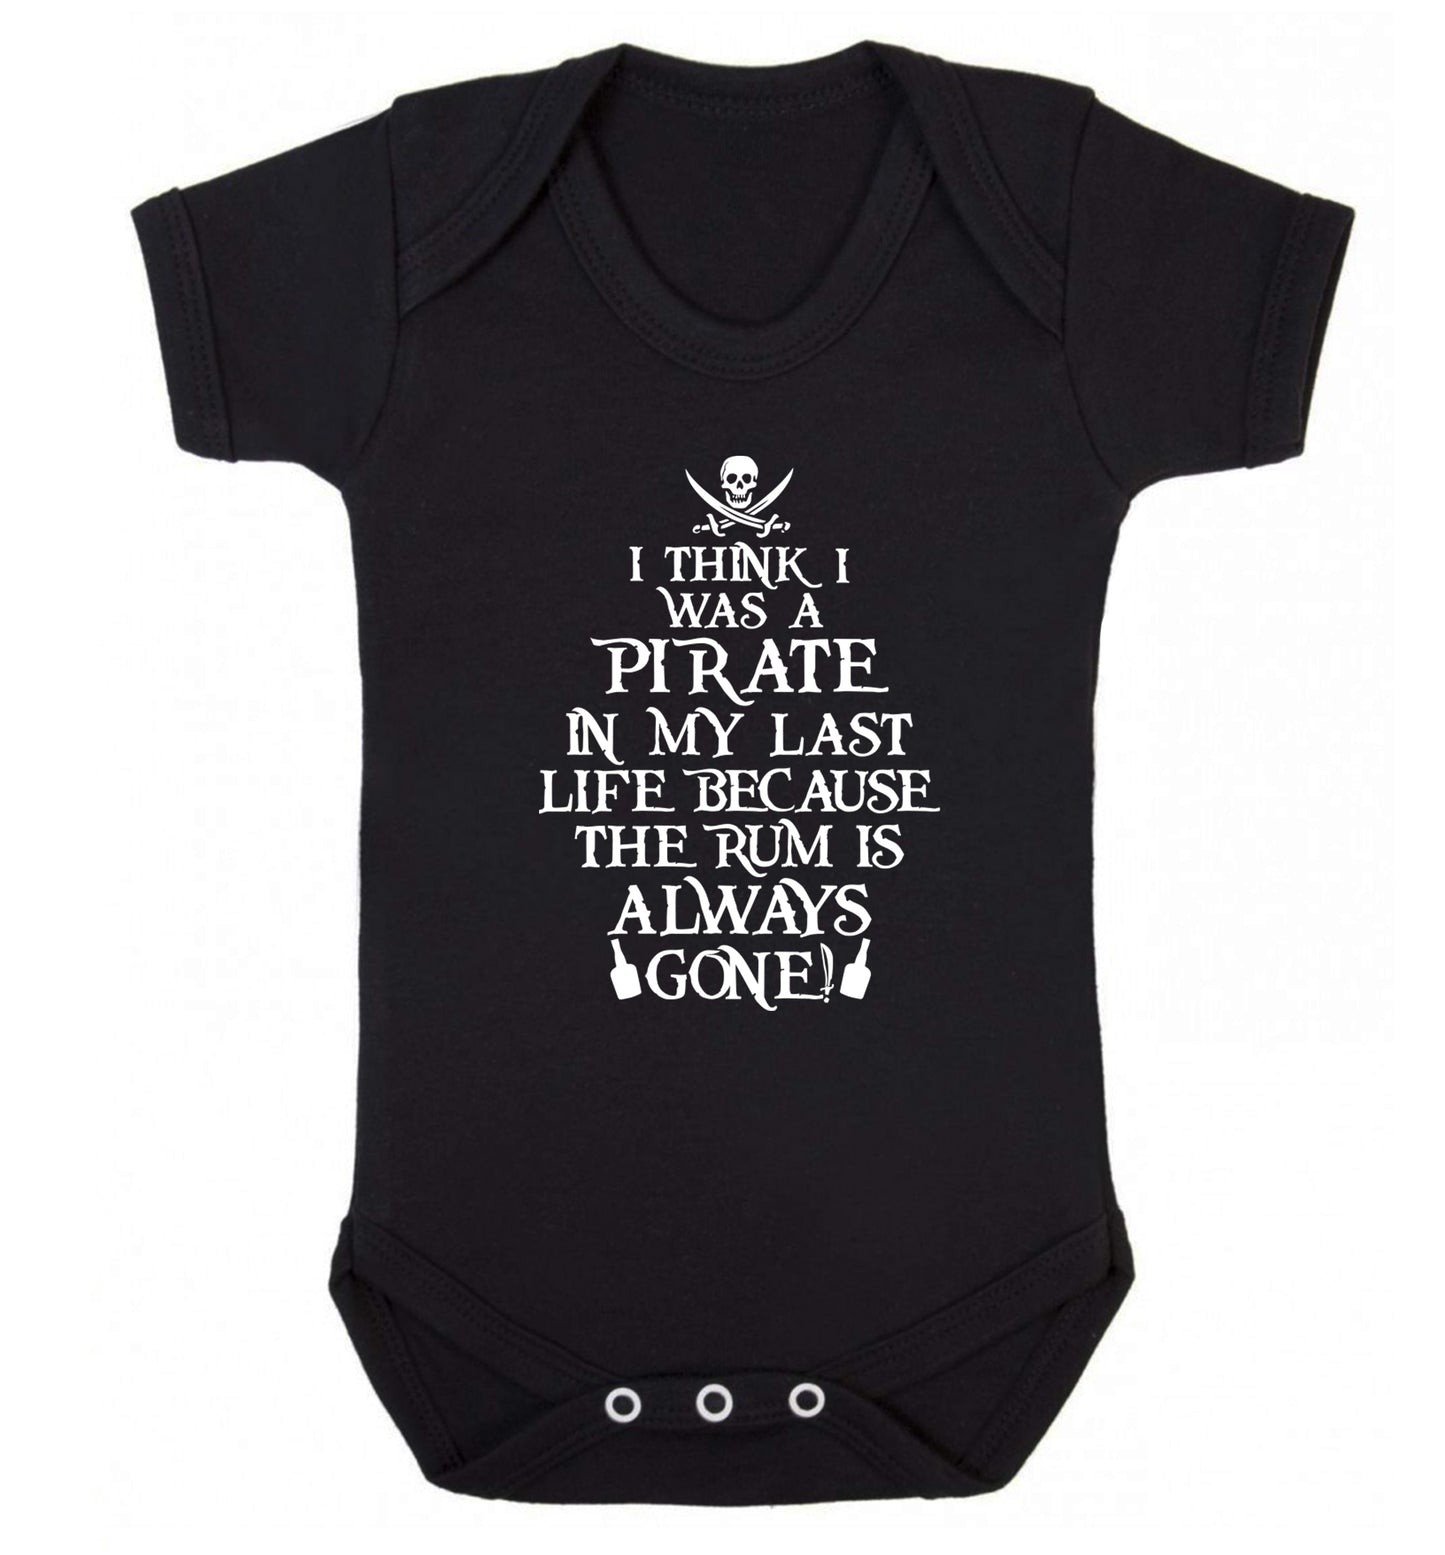 I think I was a pirate in my past life because the rum is always gone! Baby Vest black 18-24 months